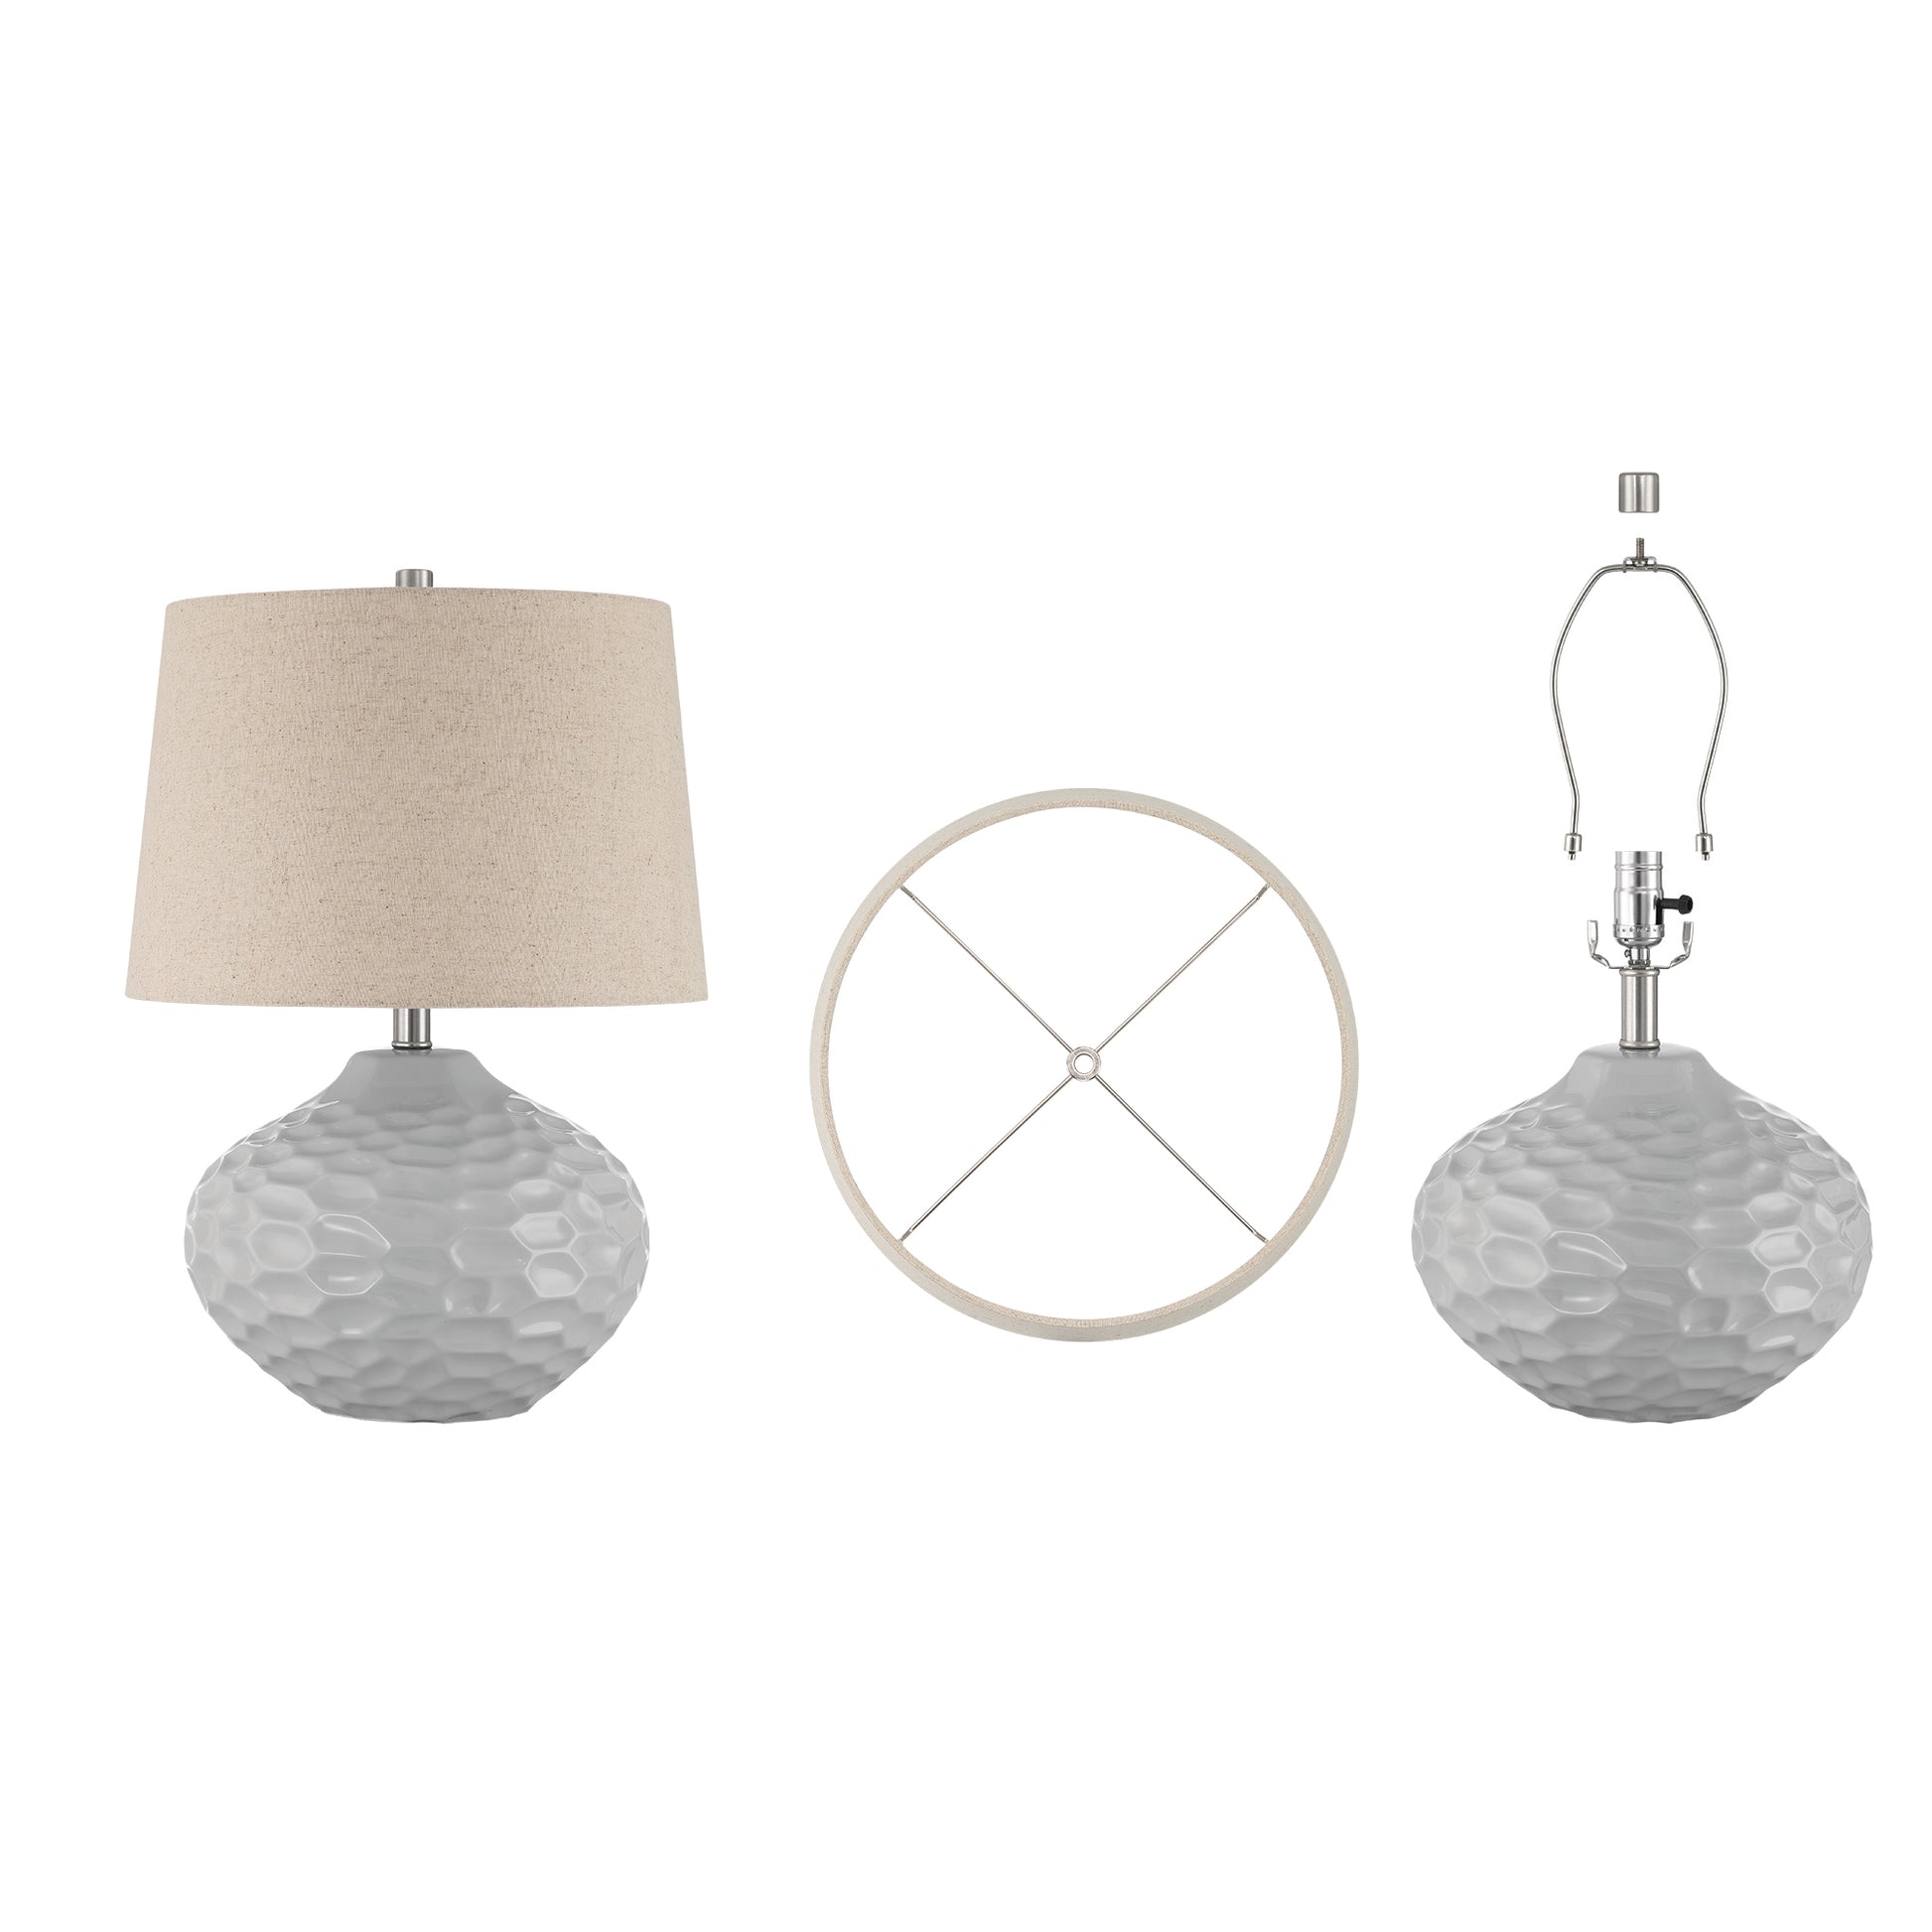 1 light gray table lamp set of 2 (3) by ACROMA